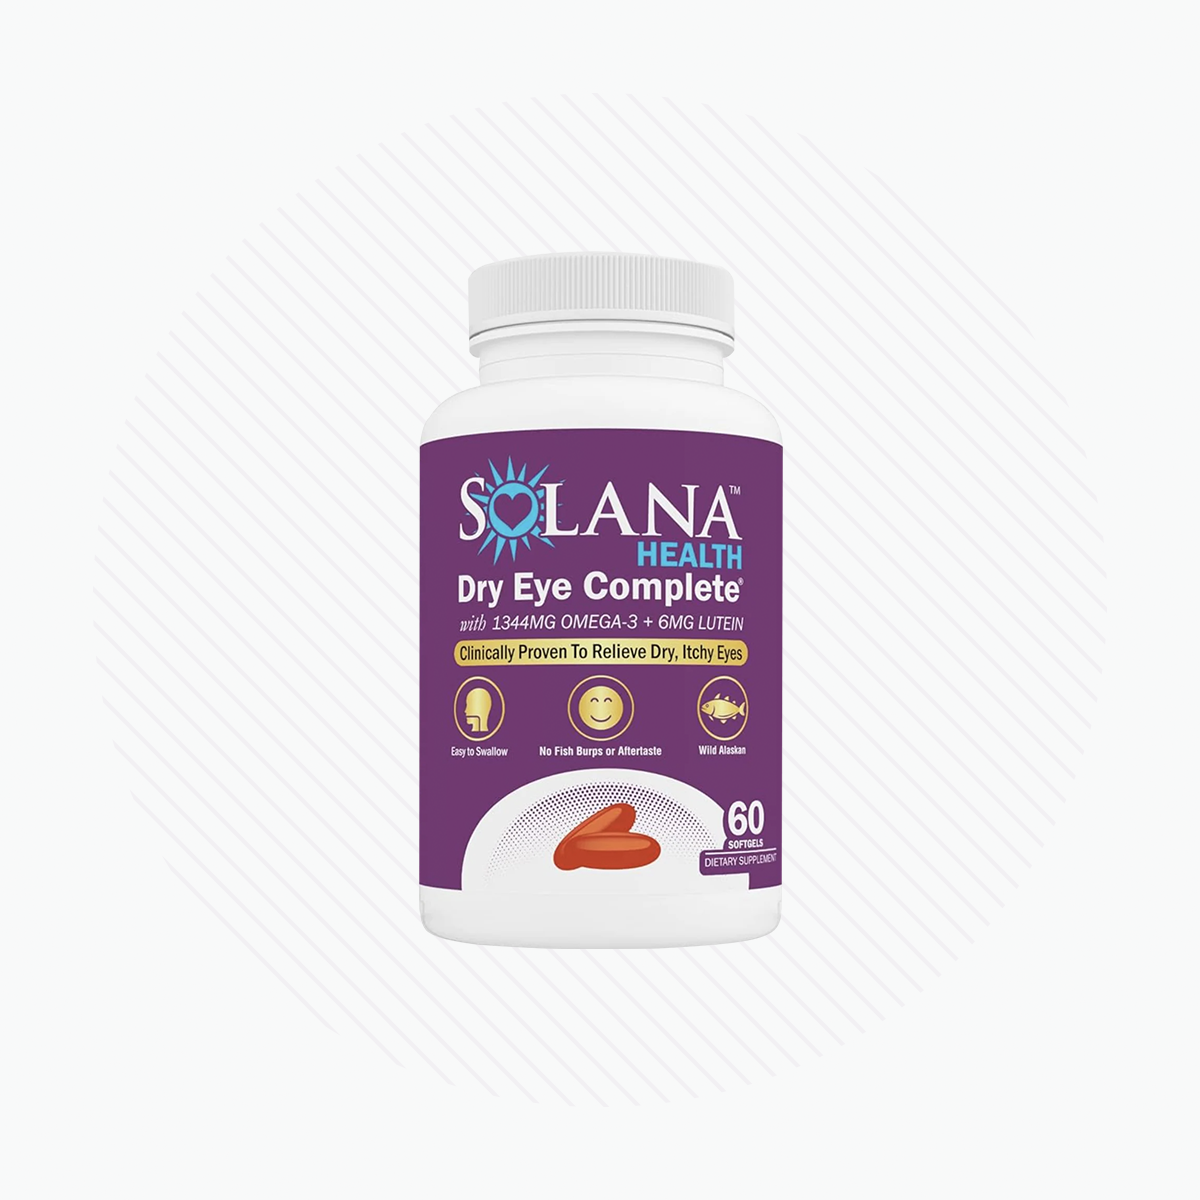 Solana Health Dry Eye Complete with Omega and Lutein (60ct Bottle)